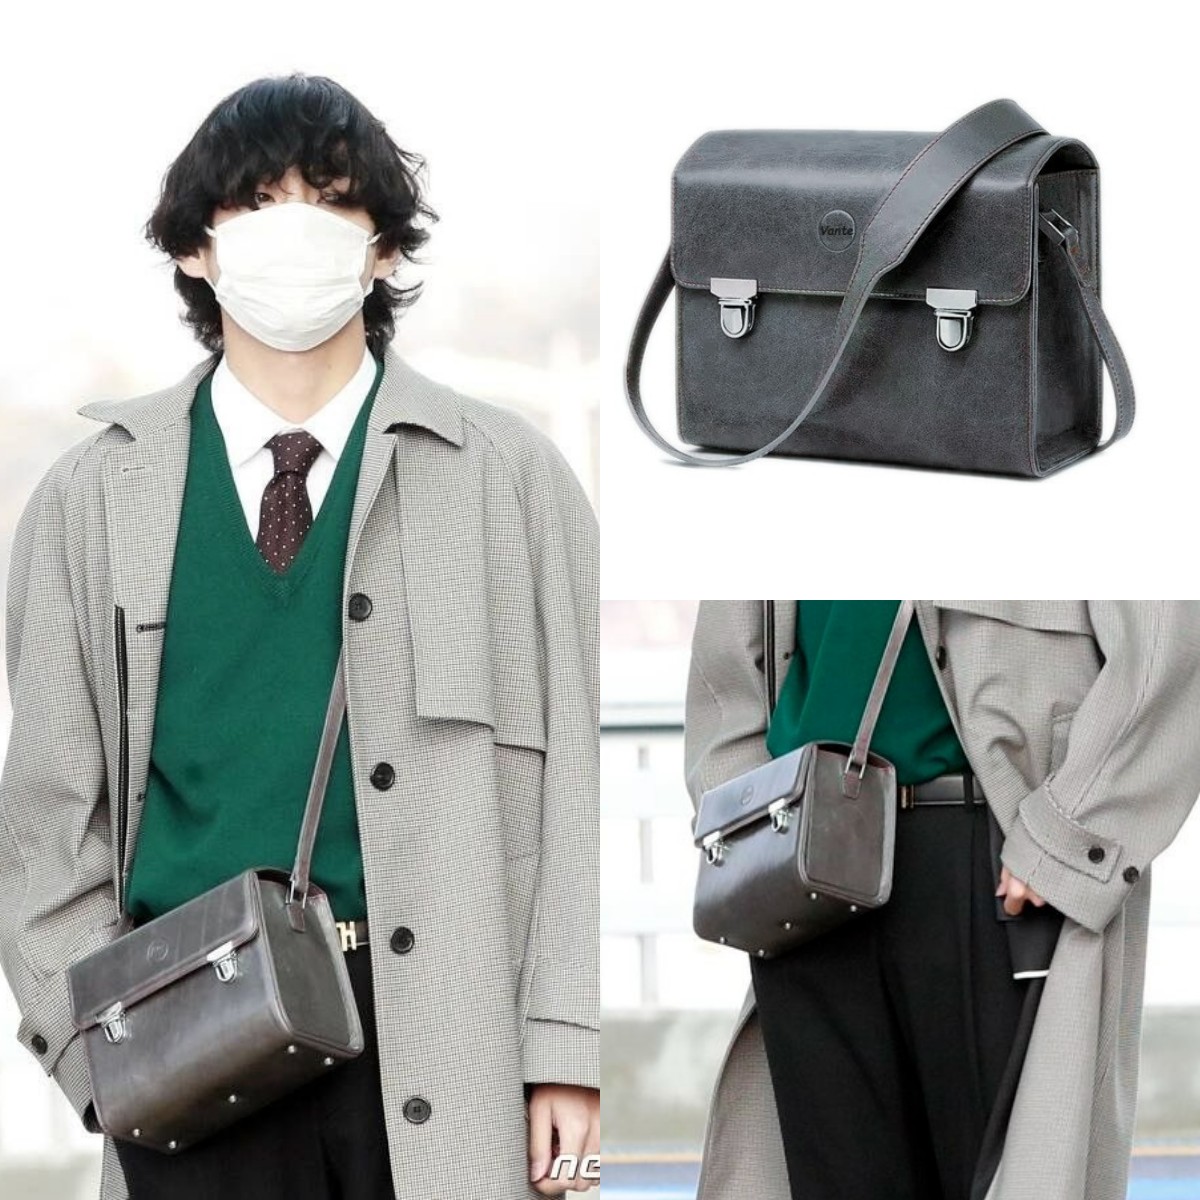 Mute Boston Bag' designed by BTS's V already sold out in Japan before going  on sale